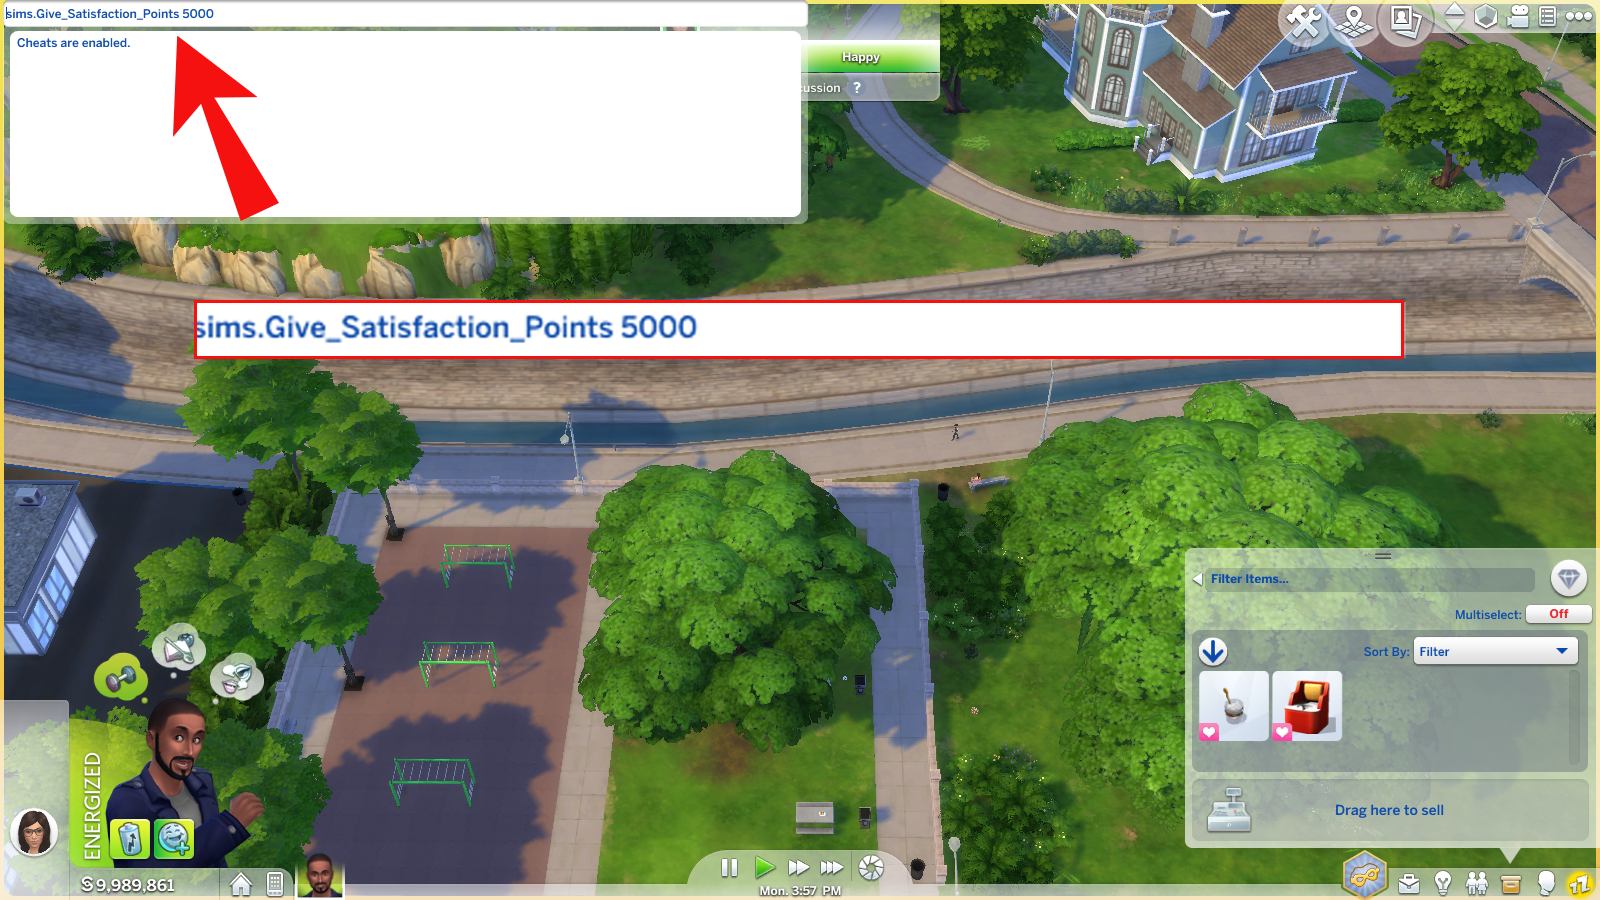 How To Disable Cheats In The Sims 4 On PS4 